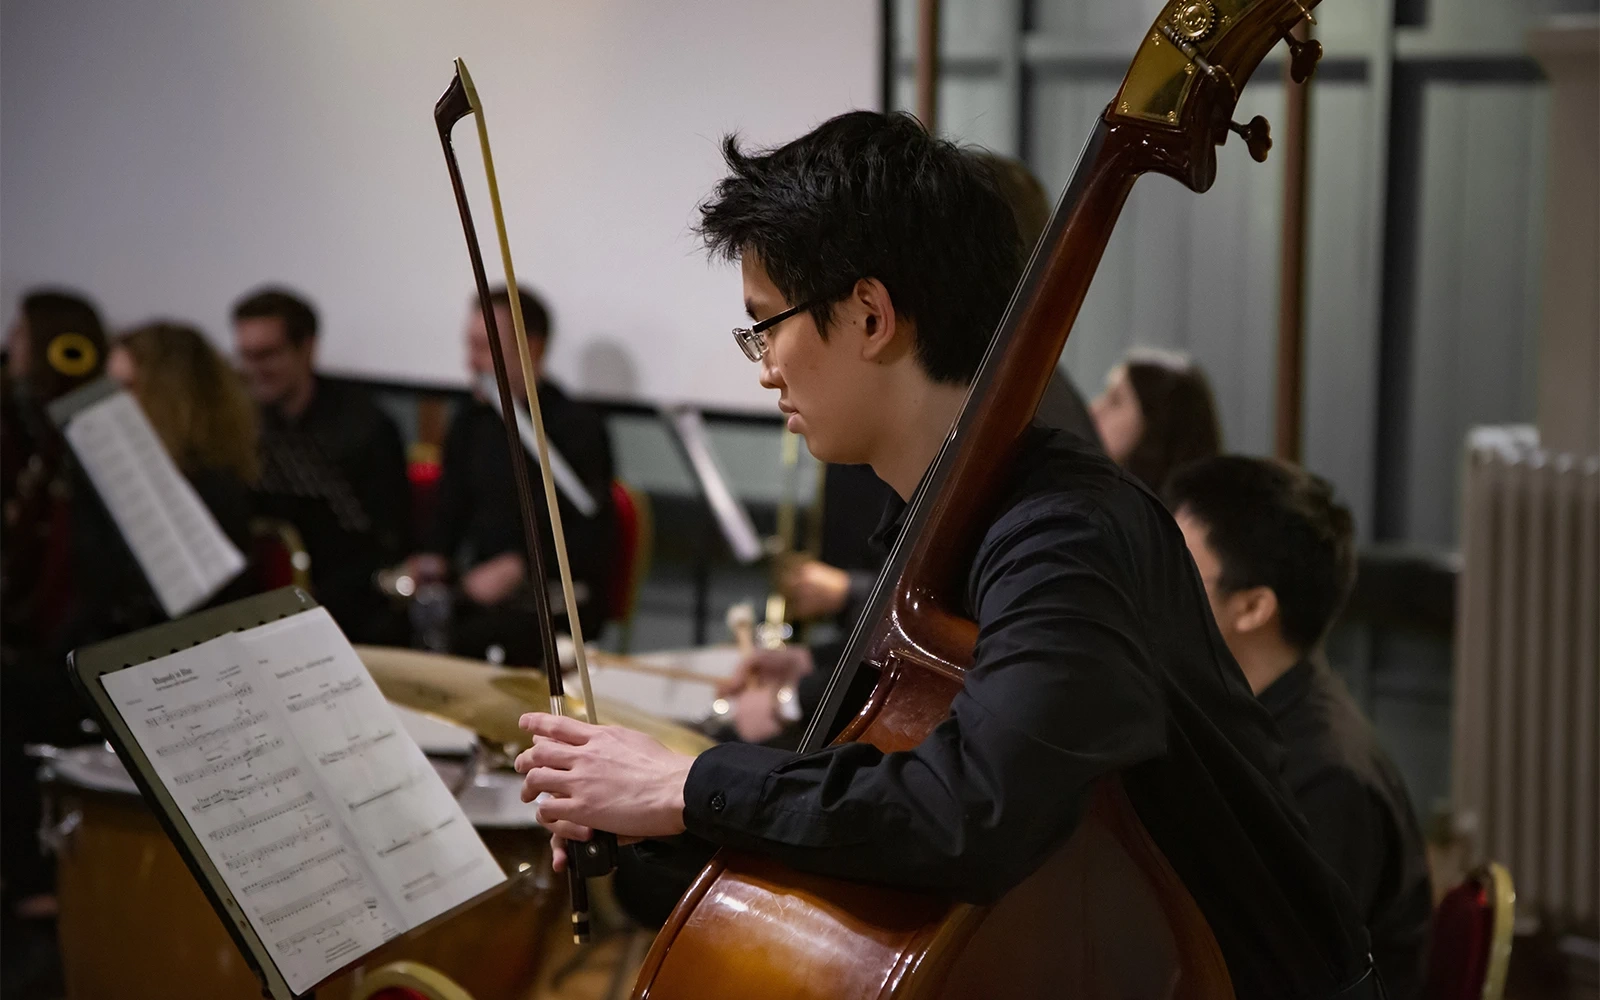 A young man about to play the double bass during an orchestral concert